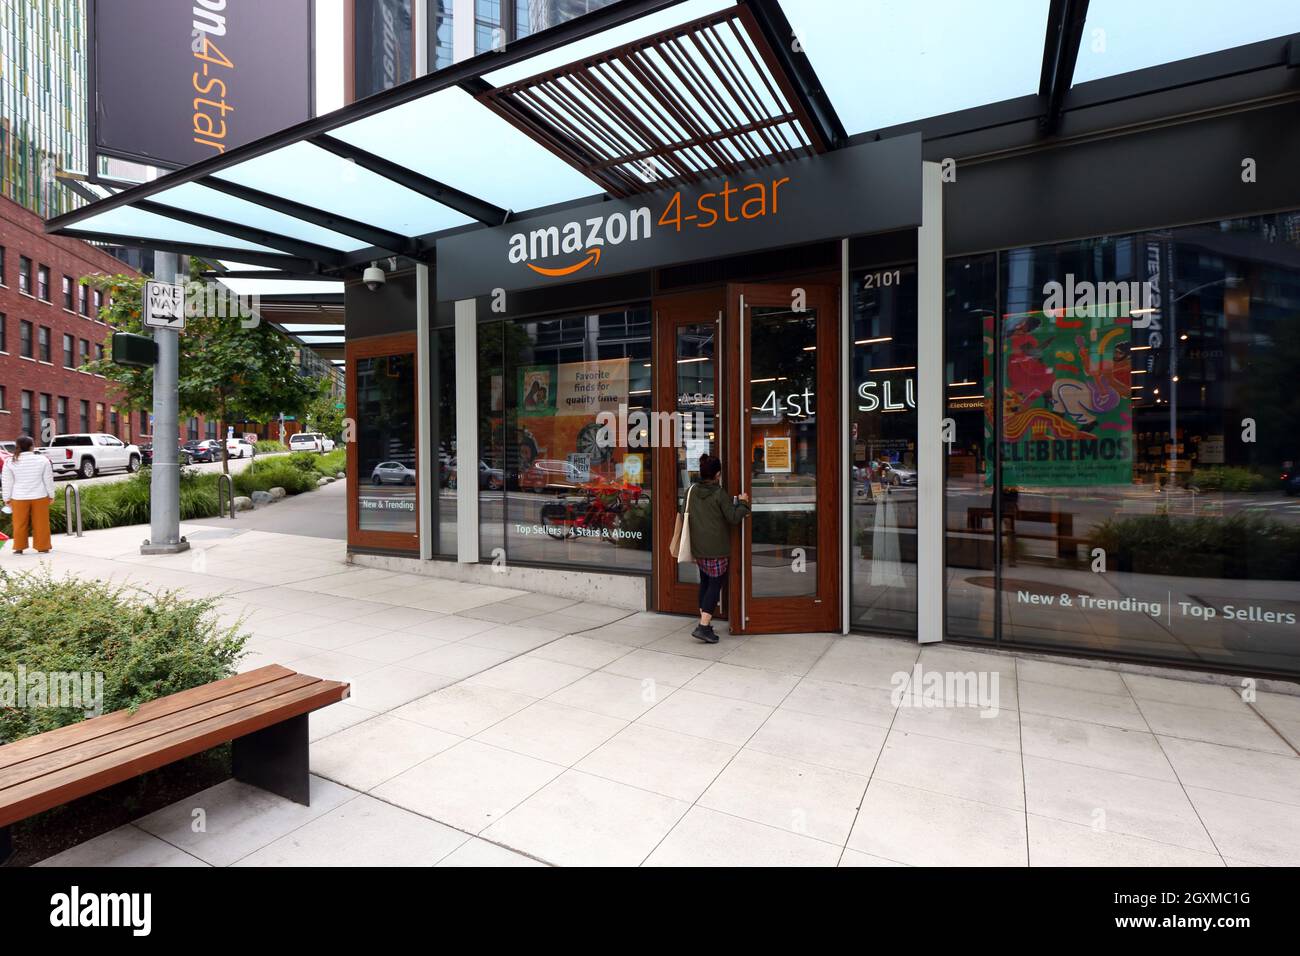 [historical storefront] Amazon 4-Star, 2101 Westlake Ave, Seattle storefront photo of an eclectic goods store in the South Lake Union, Washington Stock Photo